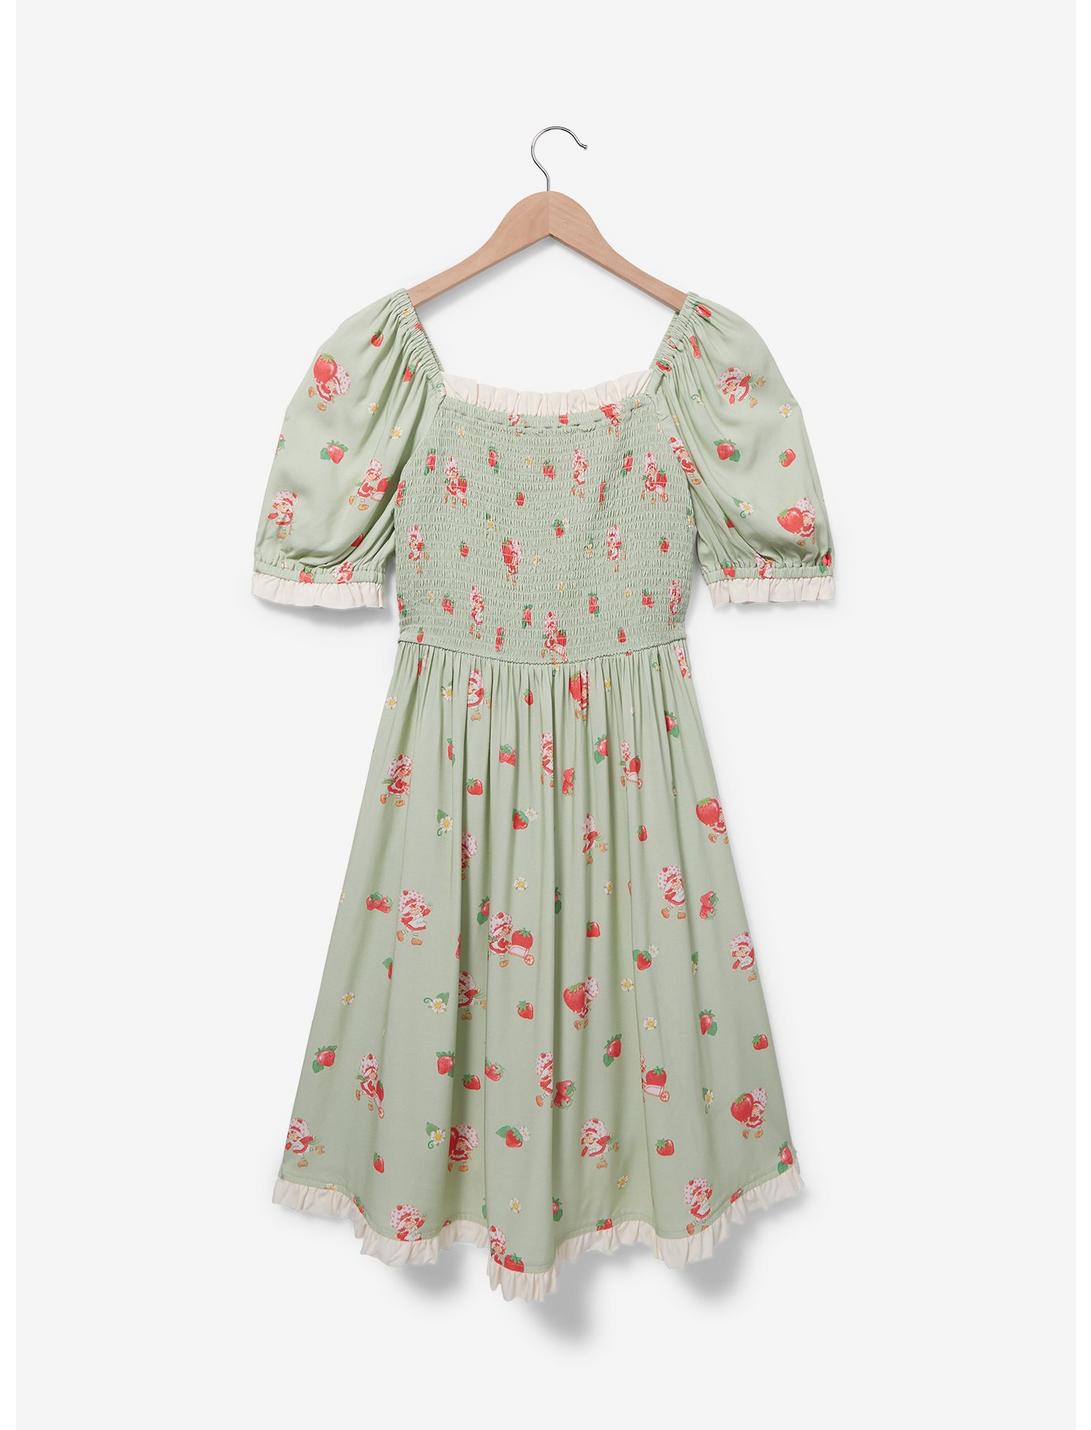 Strawberry Shortcake Allover Print Smock Dress - BoxLunch Exclusive, LIGHT GREEN, hi-res